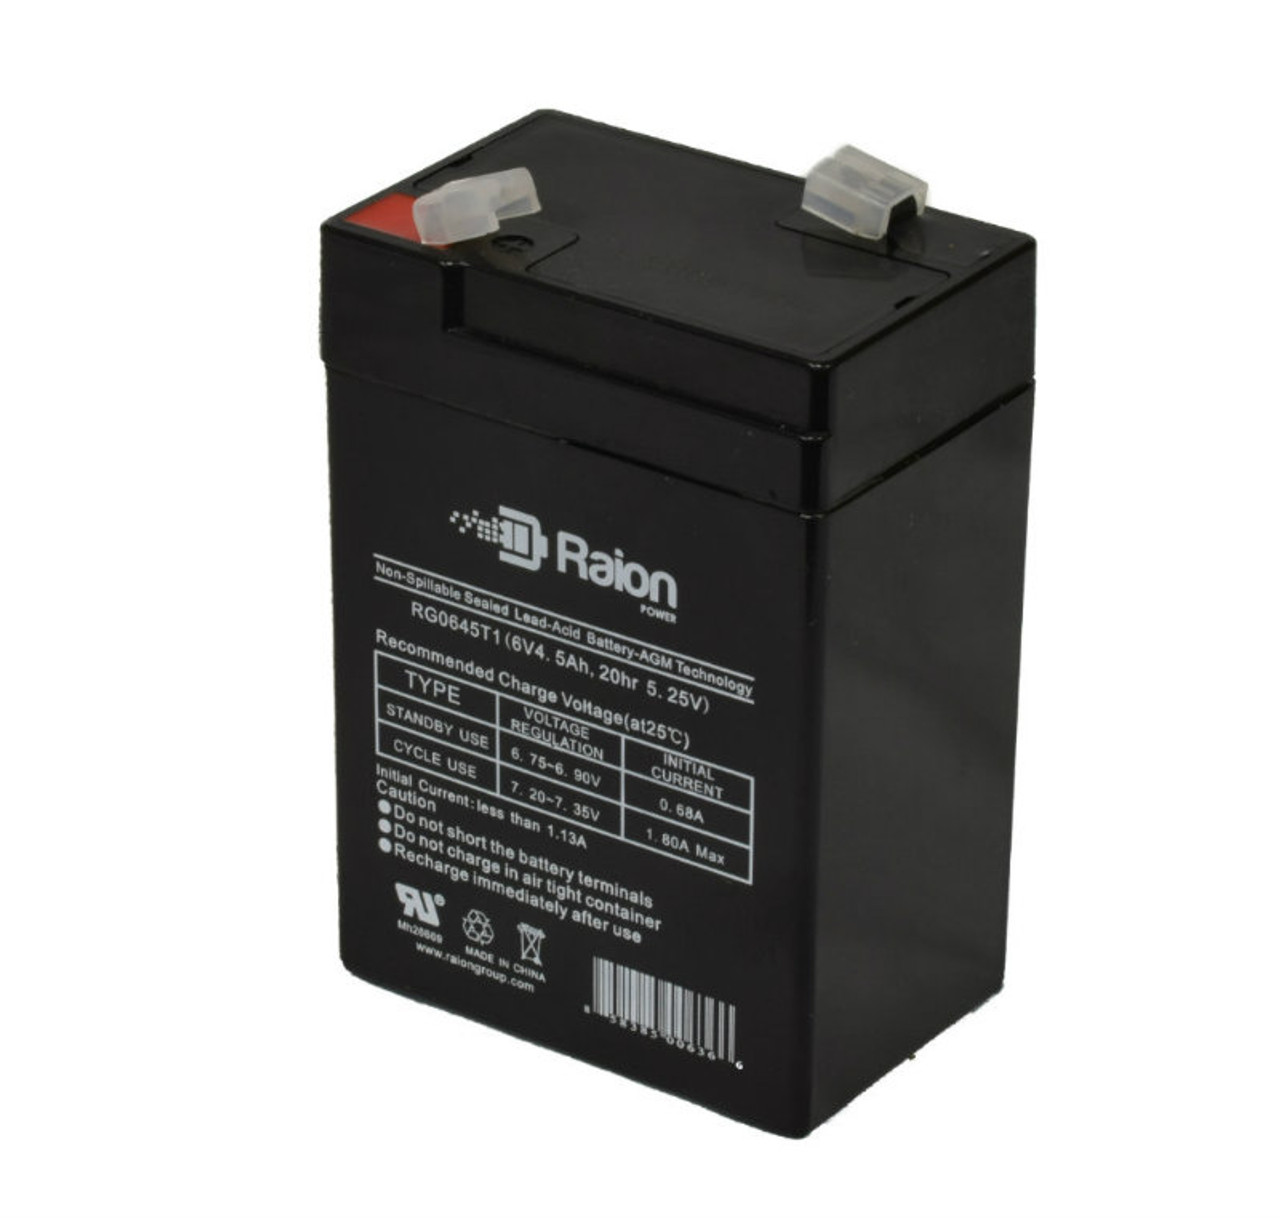 Raion Power RG0645T1 6V 4.5Ah Replacement Battery Cartridge for Light Alarms RXE8